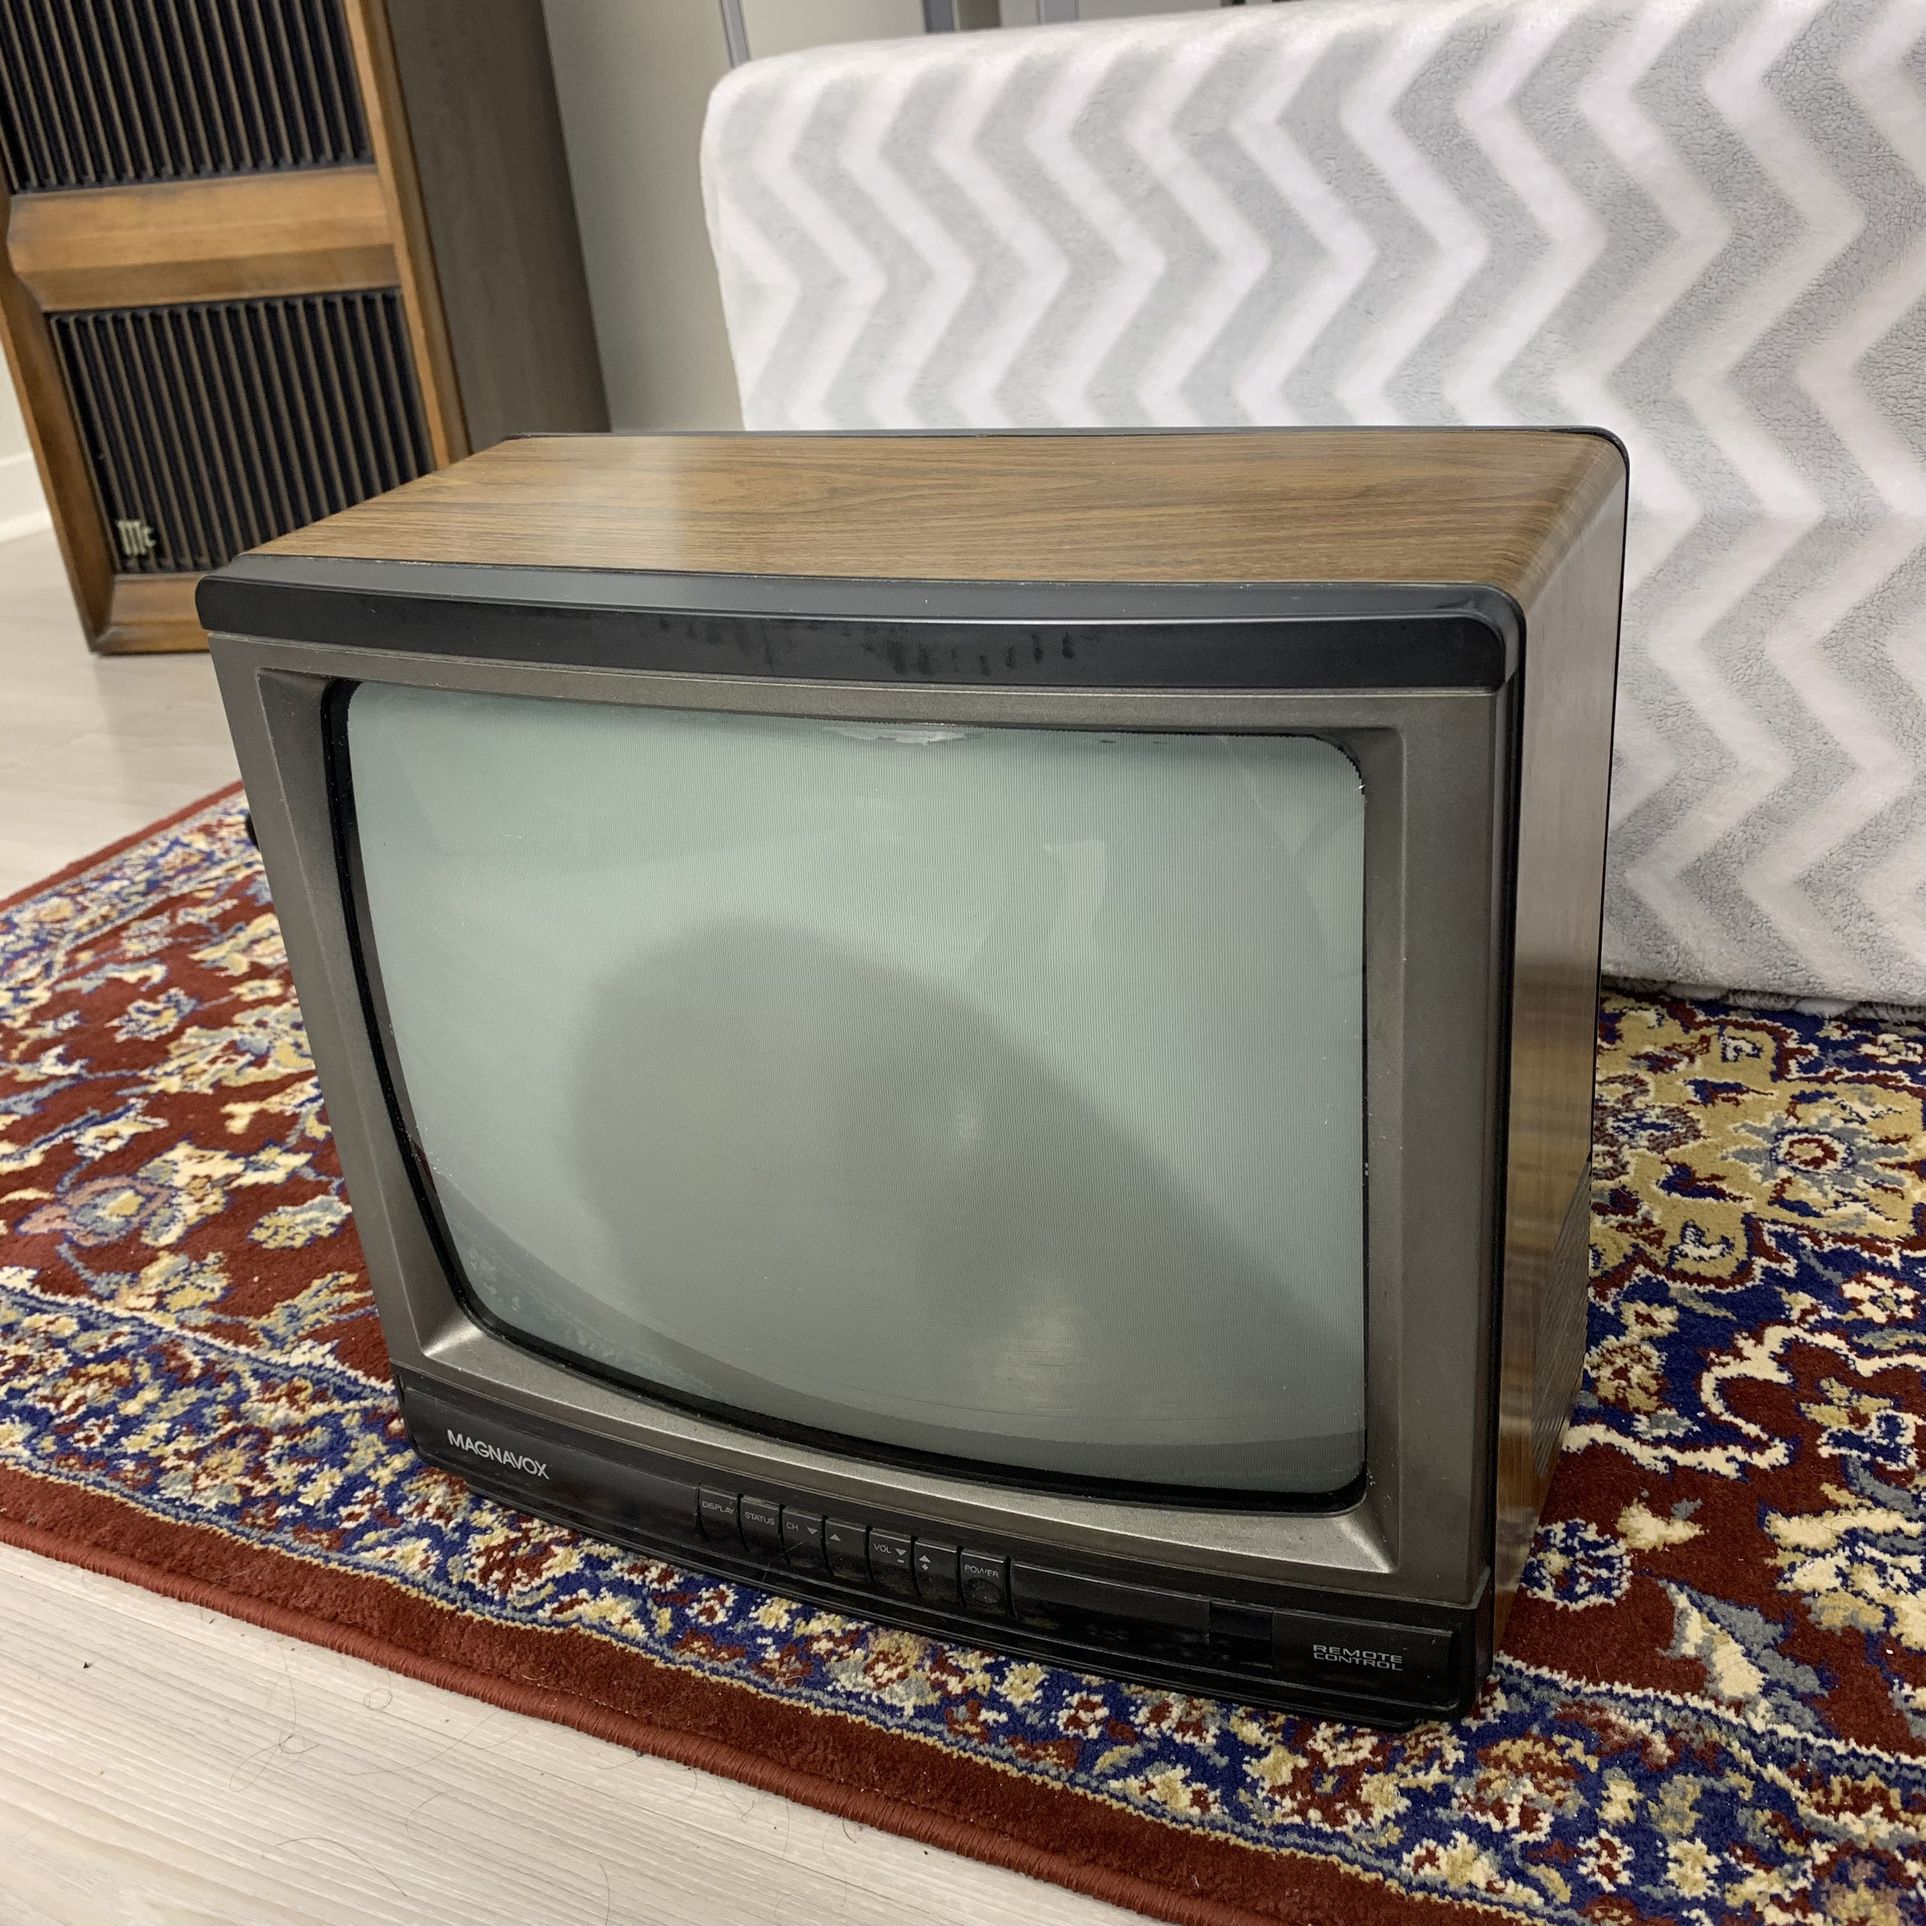 Magnavox 13" RR1337 W101 Retro Gaming CRT - Great Condition - Great Geometry